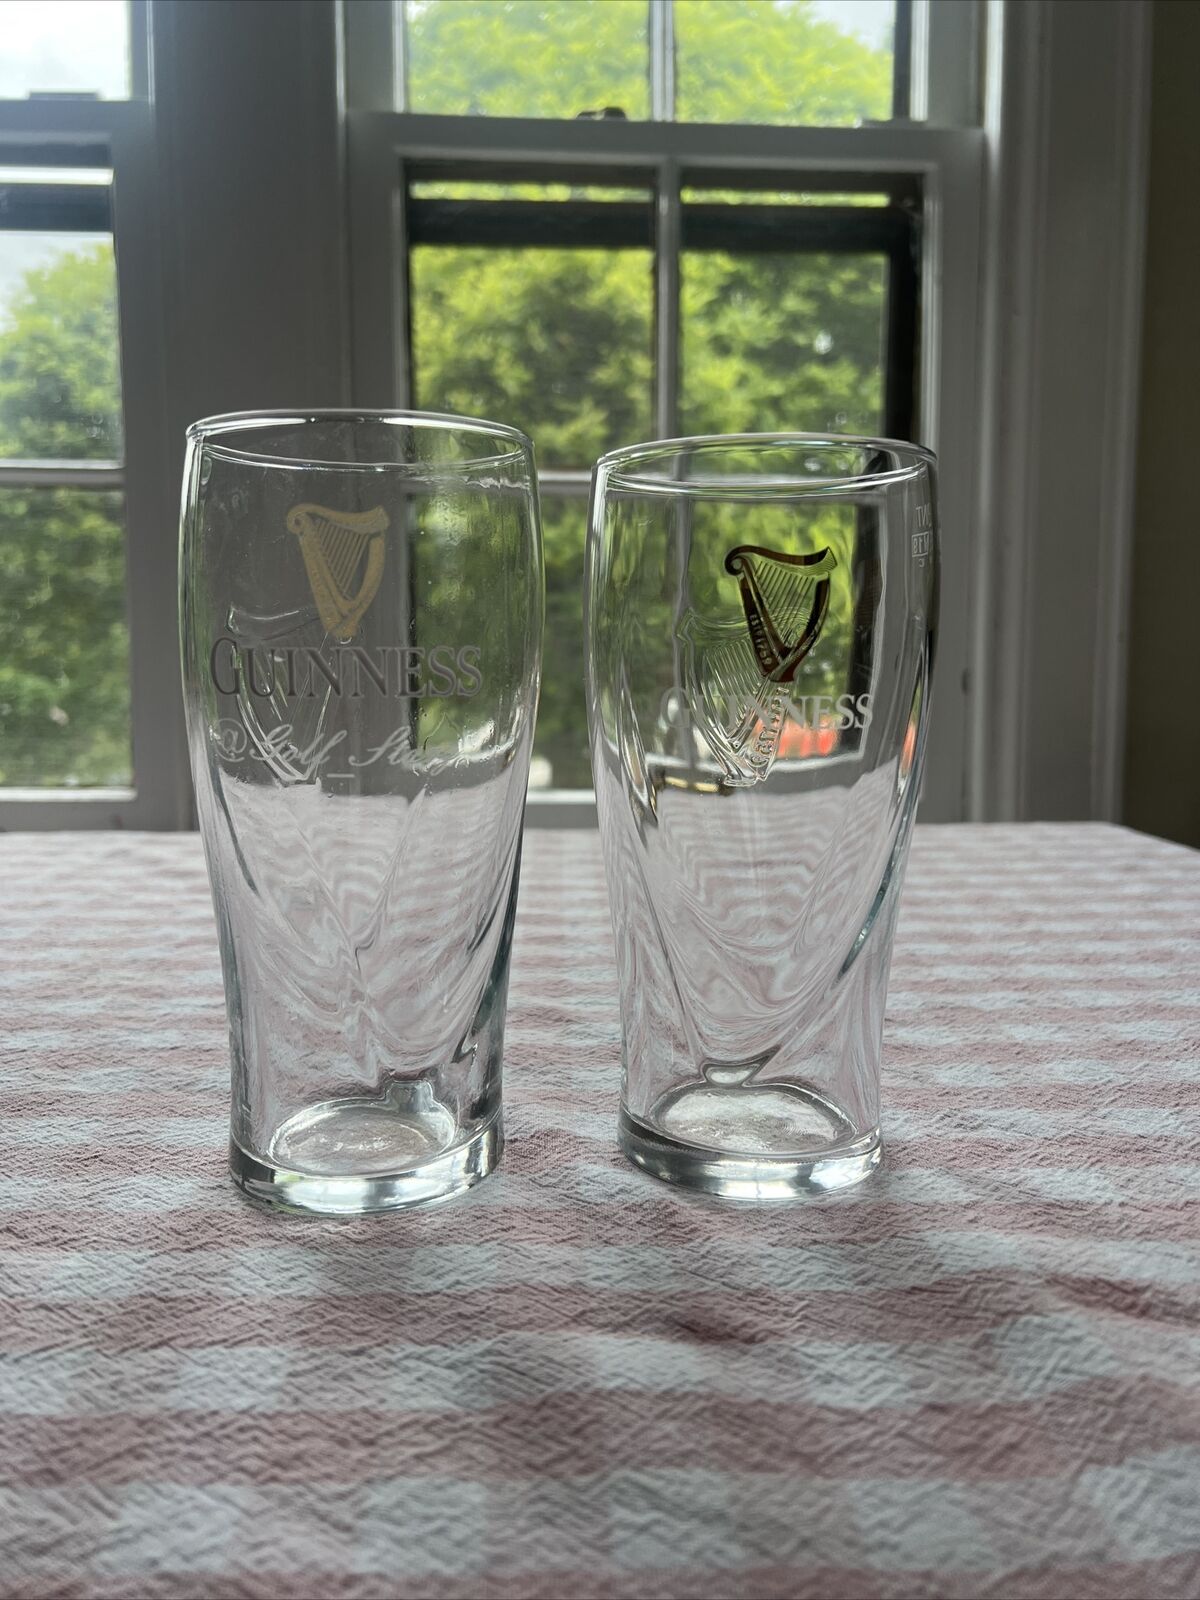 Set of Two (2) Official Guinness Stout Beer Glasses 20oz Imperial Pint - New